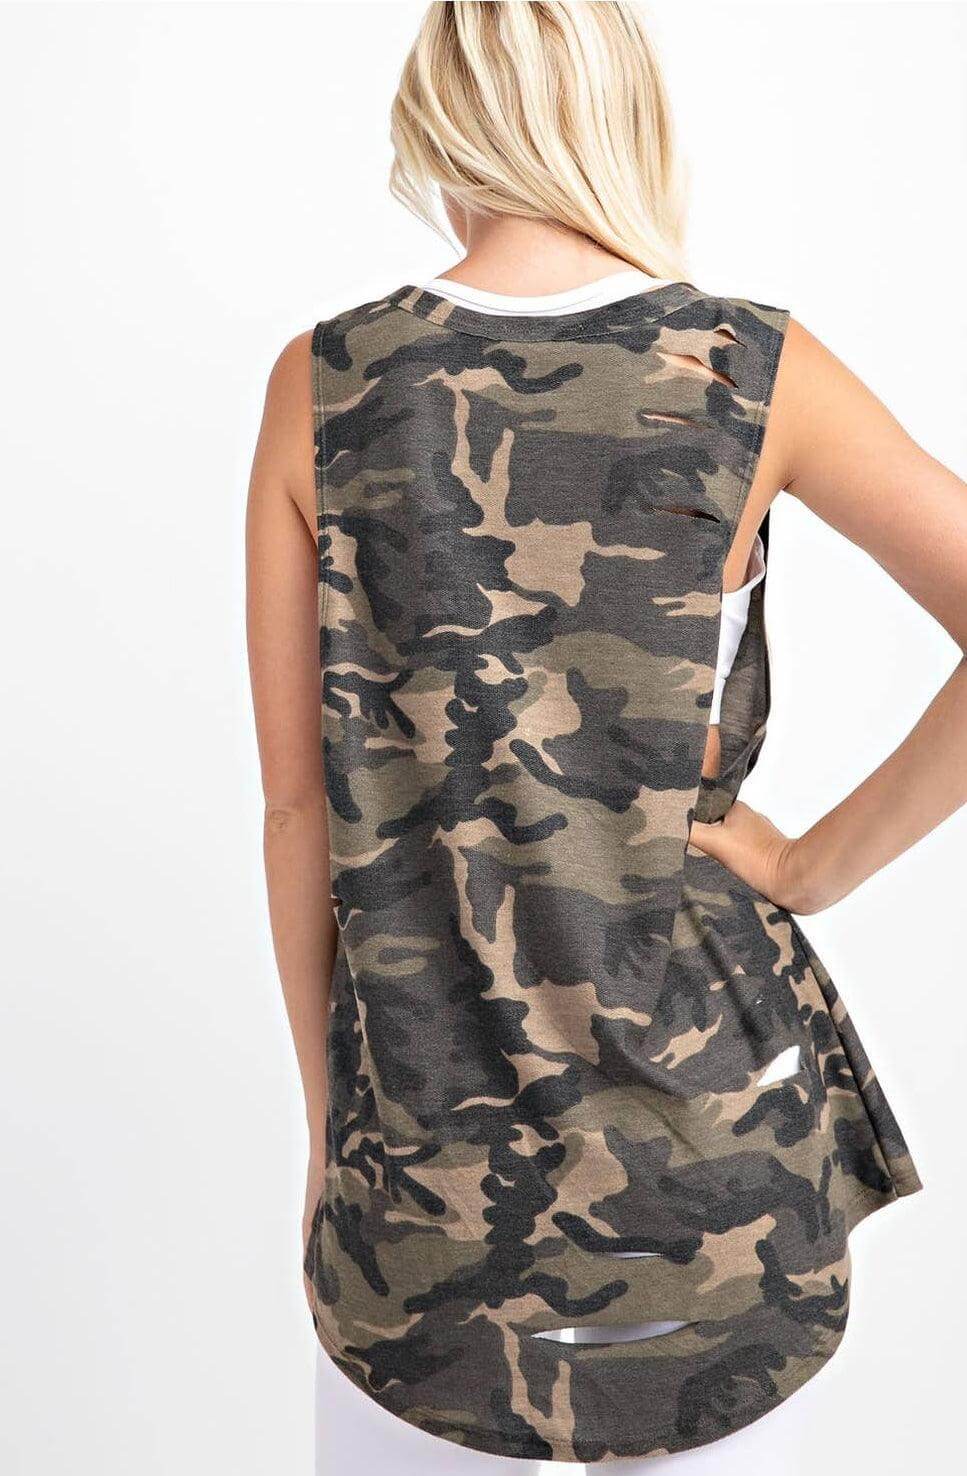 Distressed Active Tank - Green Camo - Bunky & Marie's Boutique